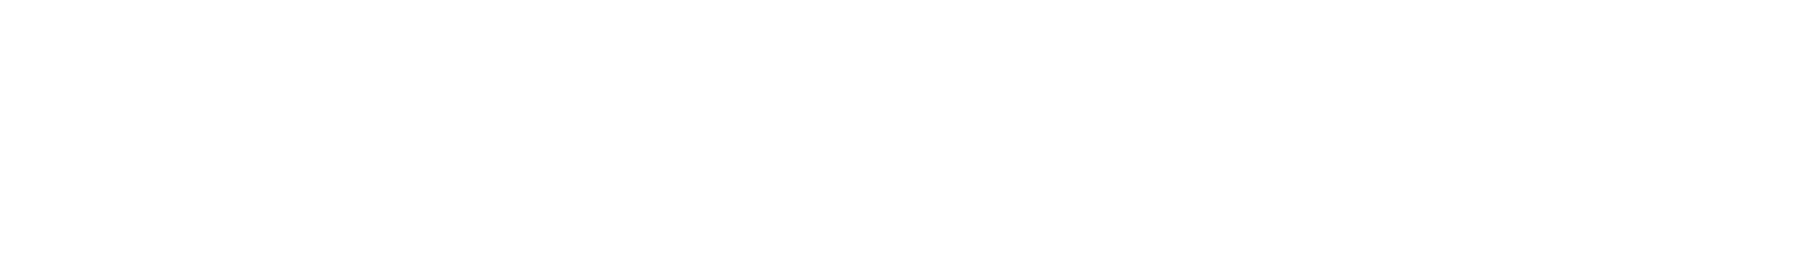 Two Sticks Forge Home